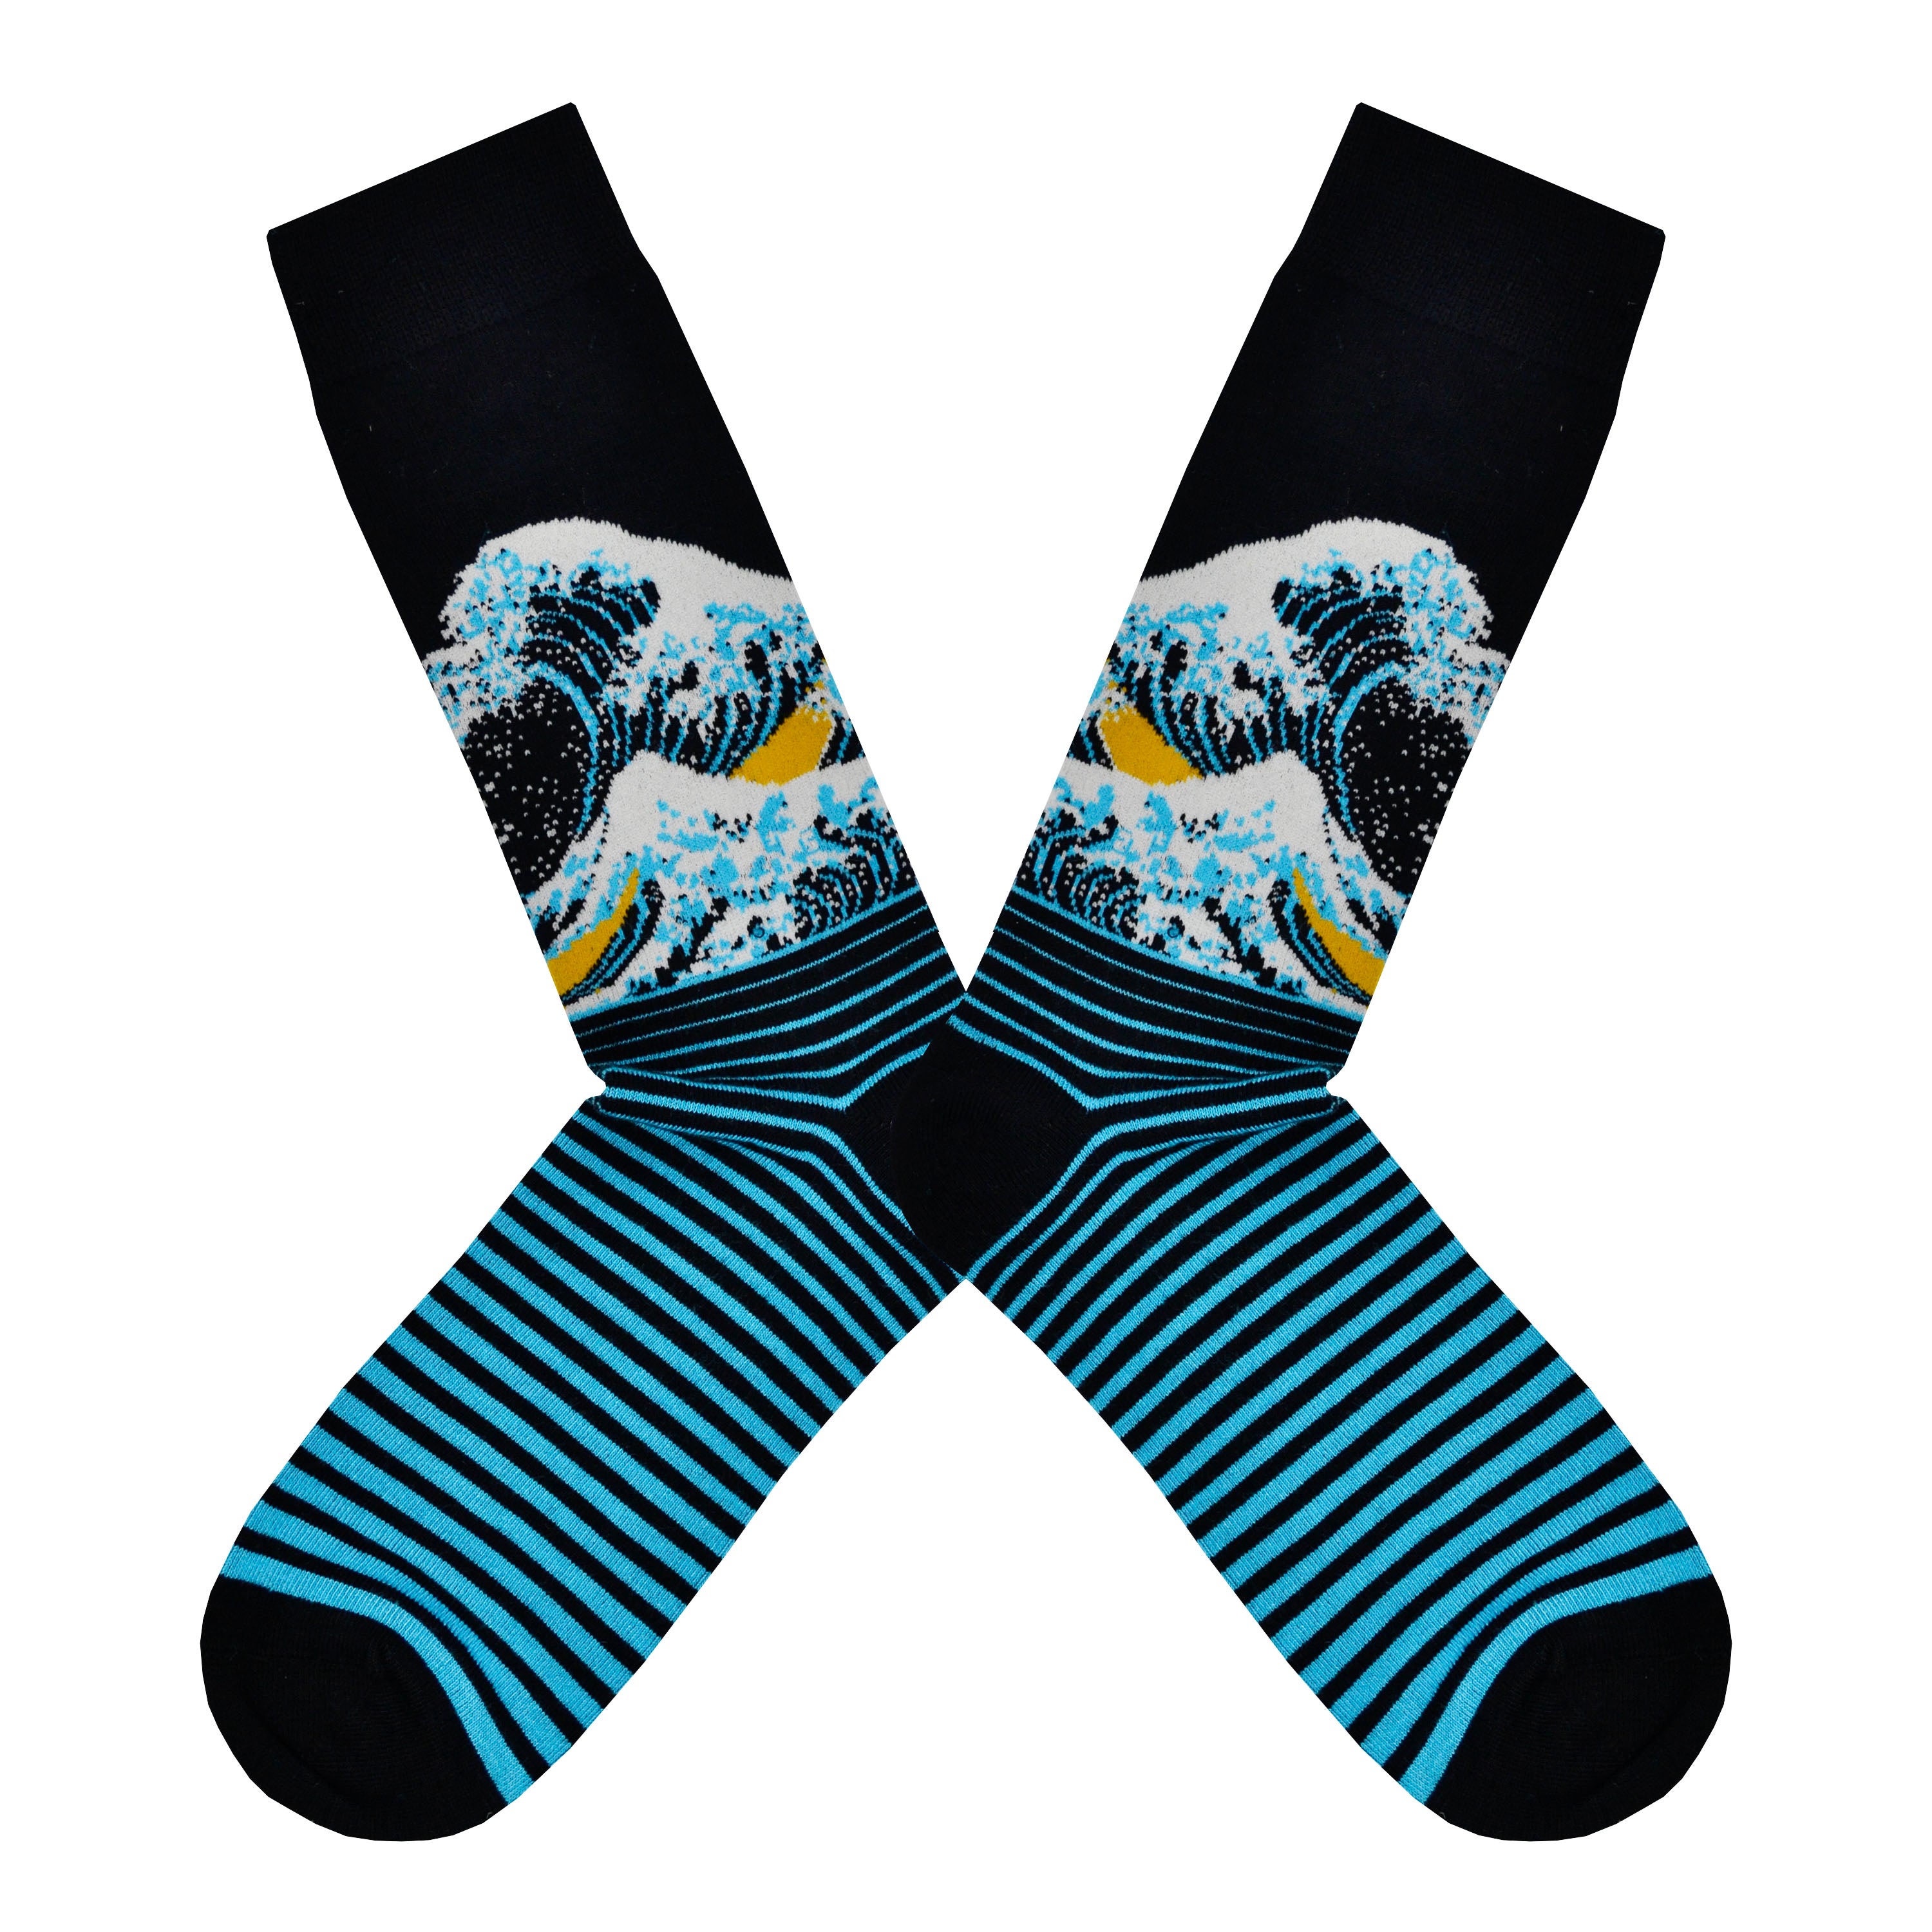 These black and blue bamboo men's crew socks by the brand Socksmith are based on the famous print The Great Wave by the Japanese artist Hokusai.